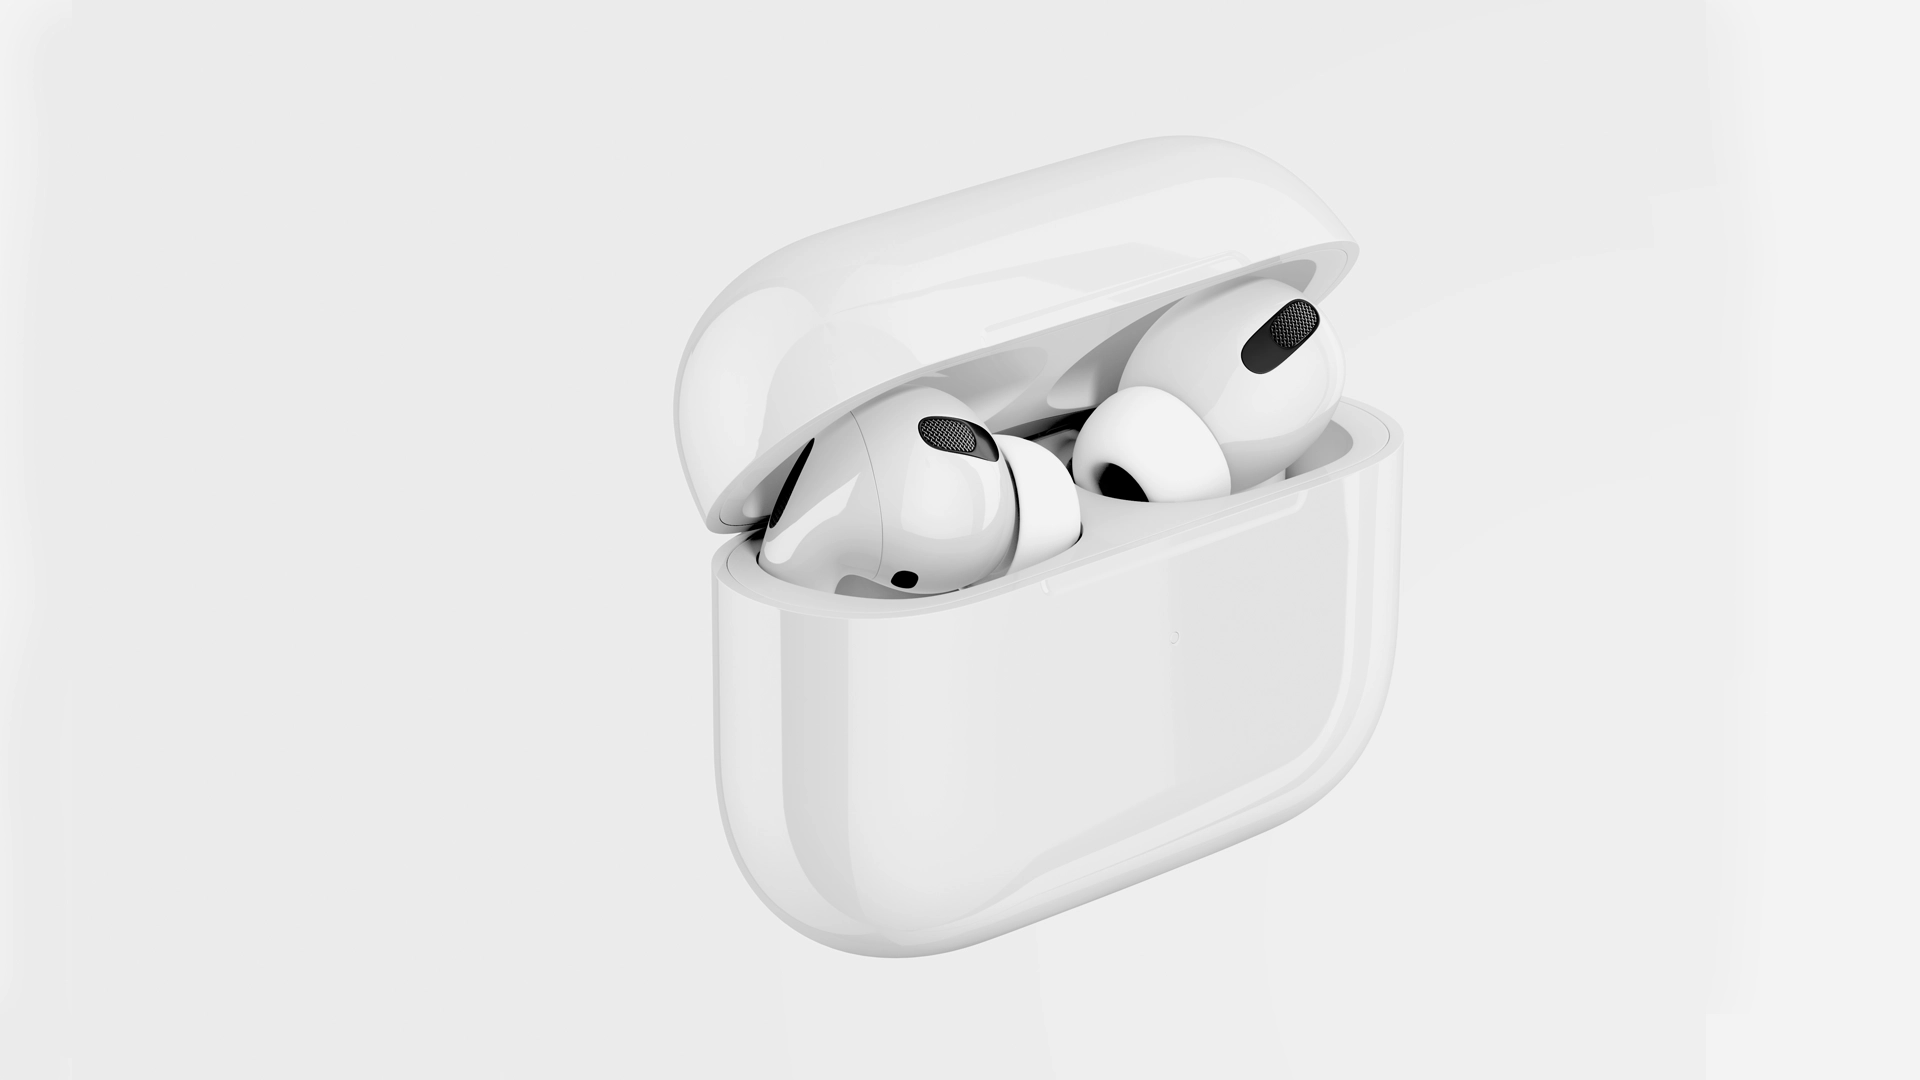 How to make AirPods louder